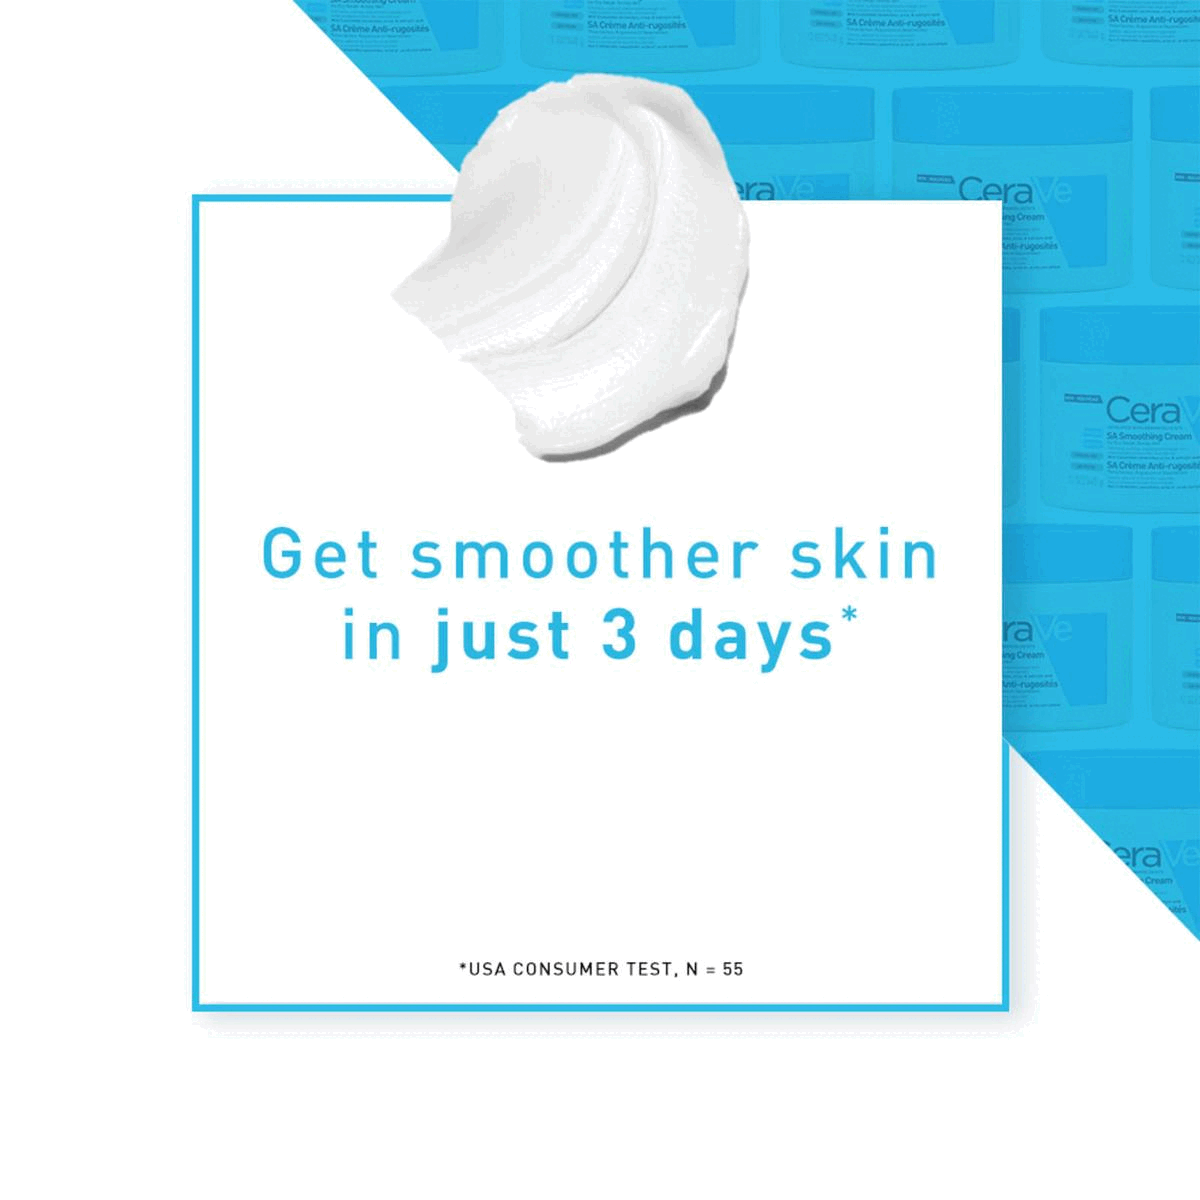 Image 1- get smoother skin in just 3 days- USA consumer test, N=55 Image 2- salicylic acid helps exfoliate and smooth Image 3- ceraVe developed with dermatologists